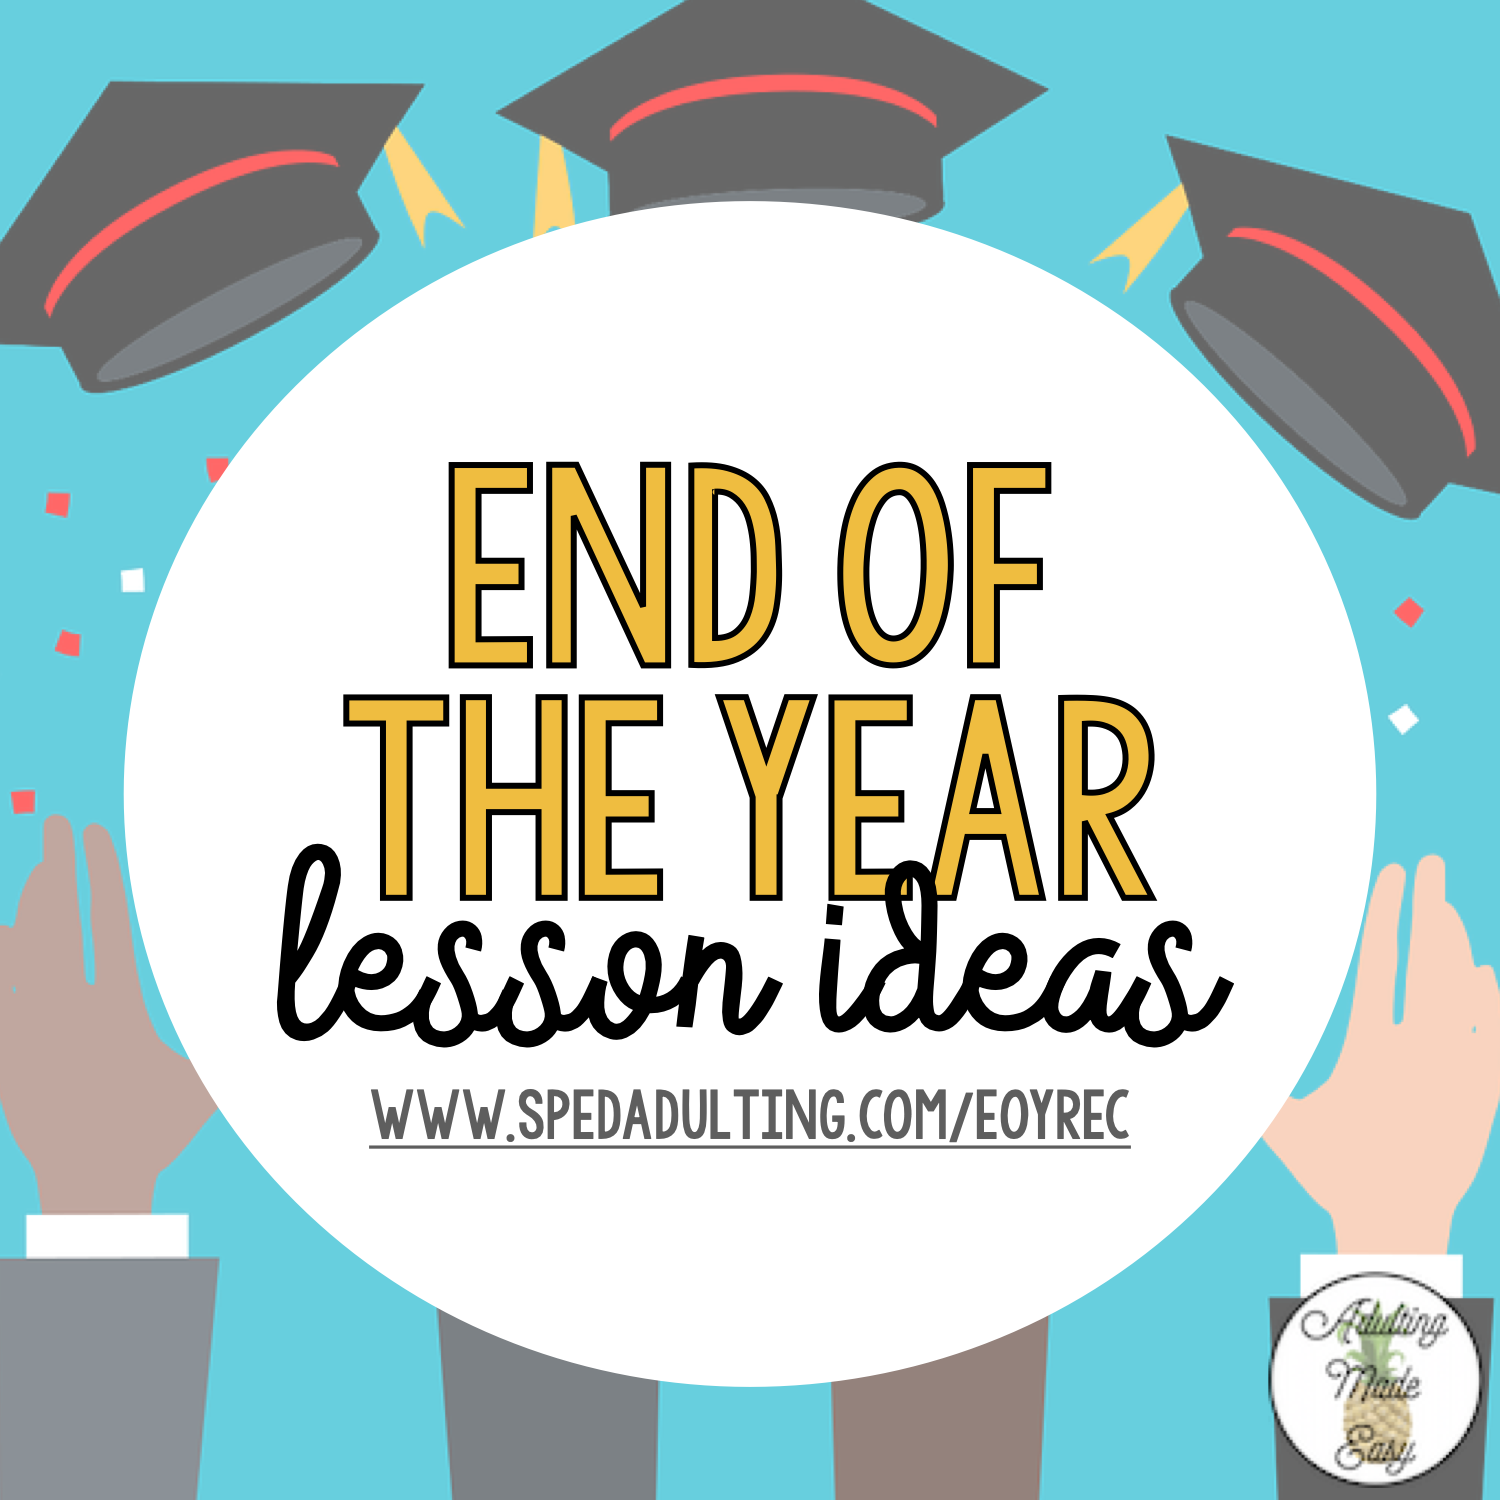 Life Skills Lessons for The End Of The Year